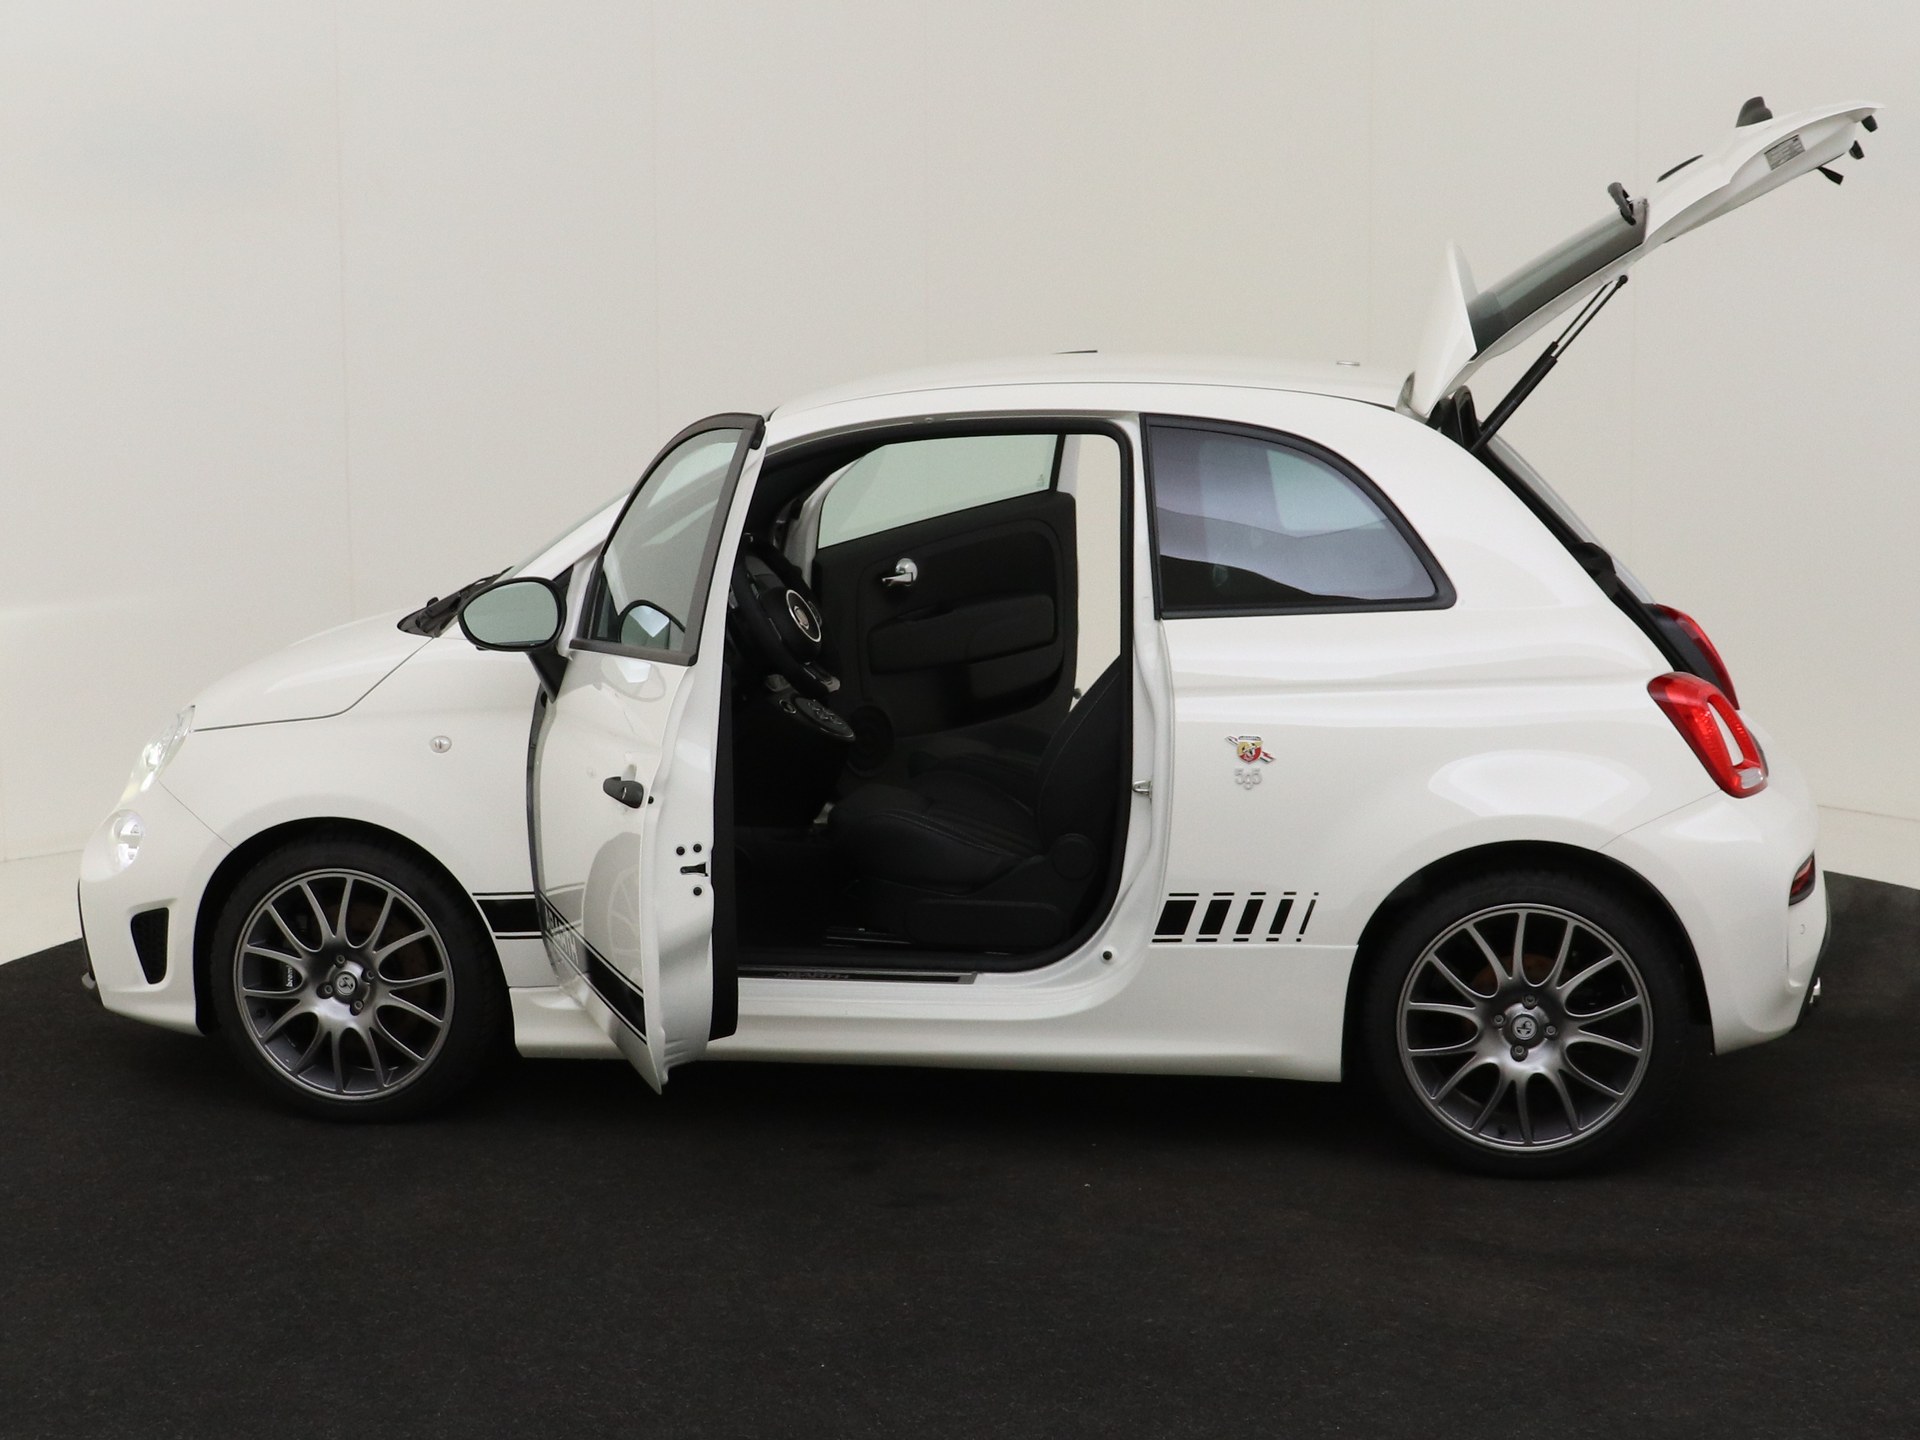 Abarth 595 1.4 180PK Competitione AUT van CarSelexy dealer Centrale Voorraad in 